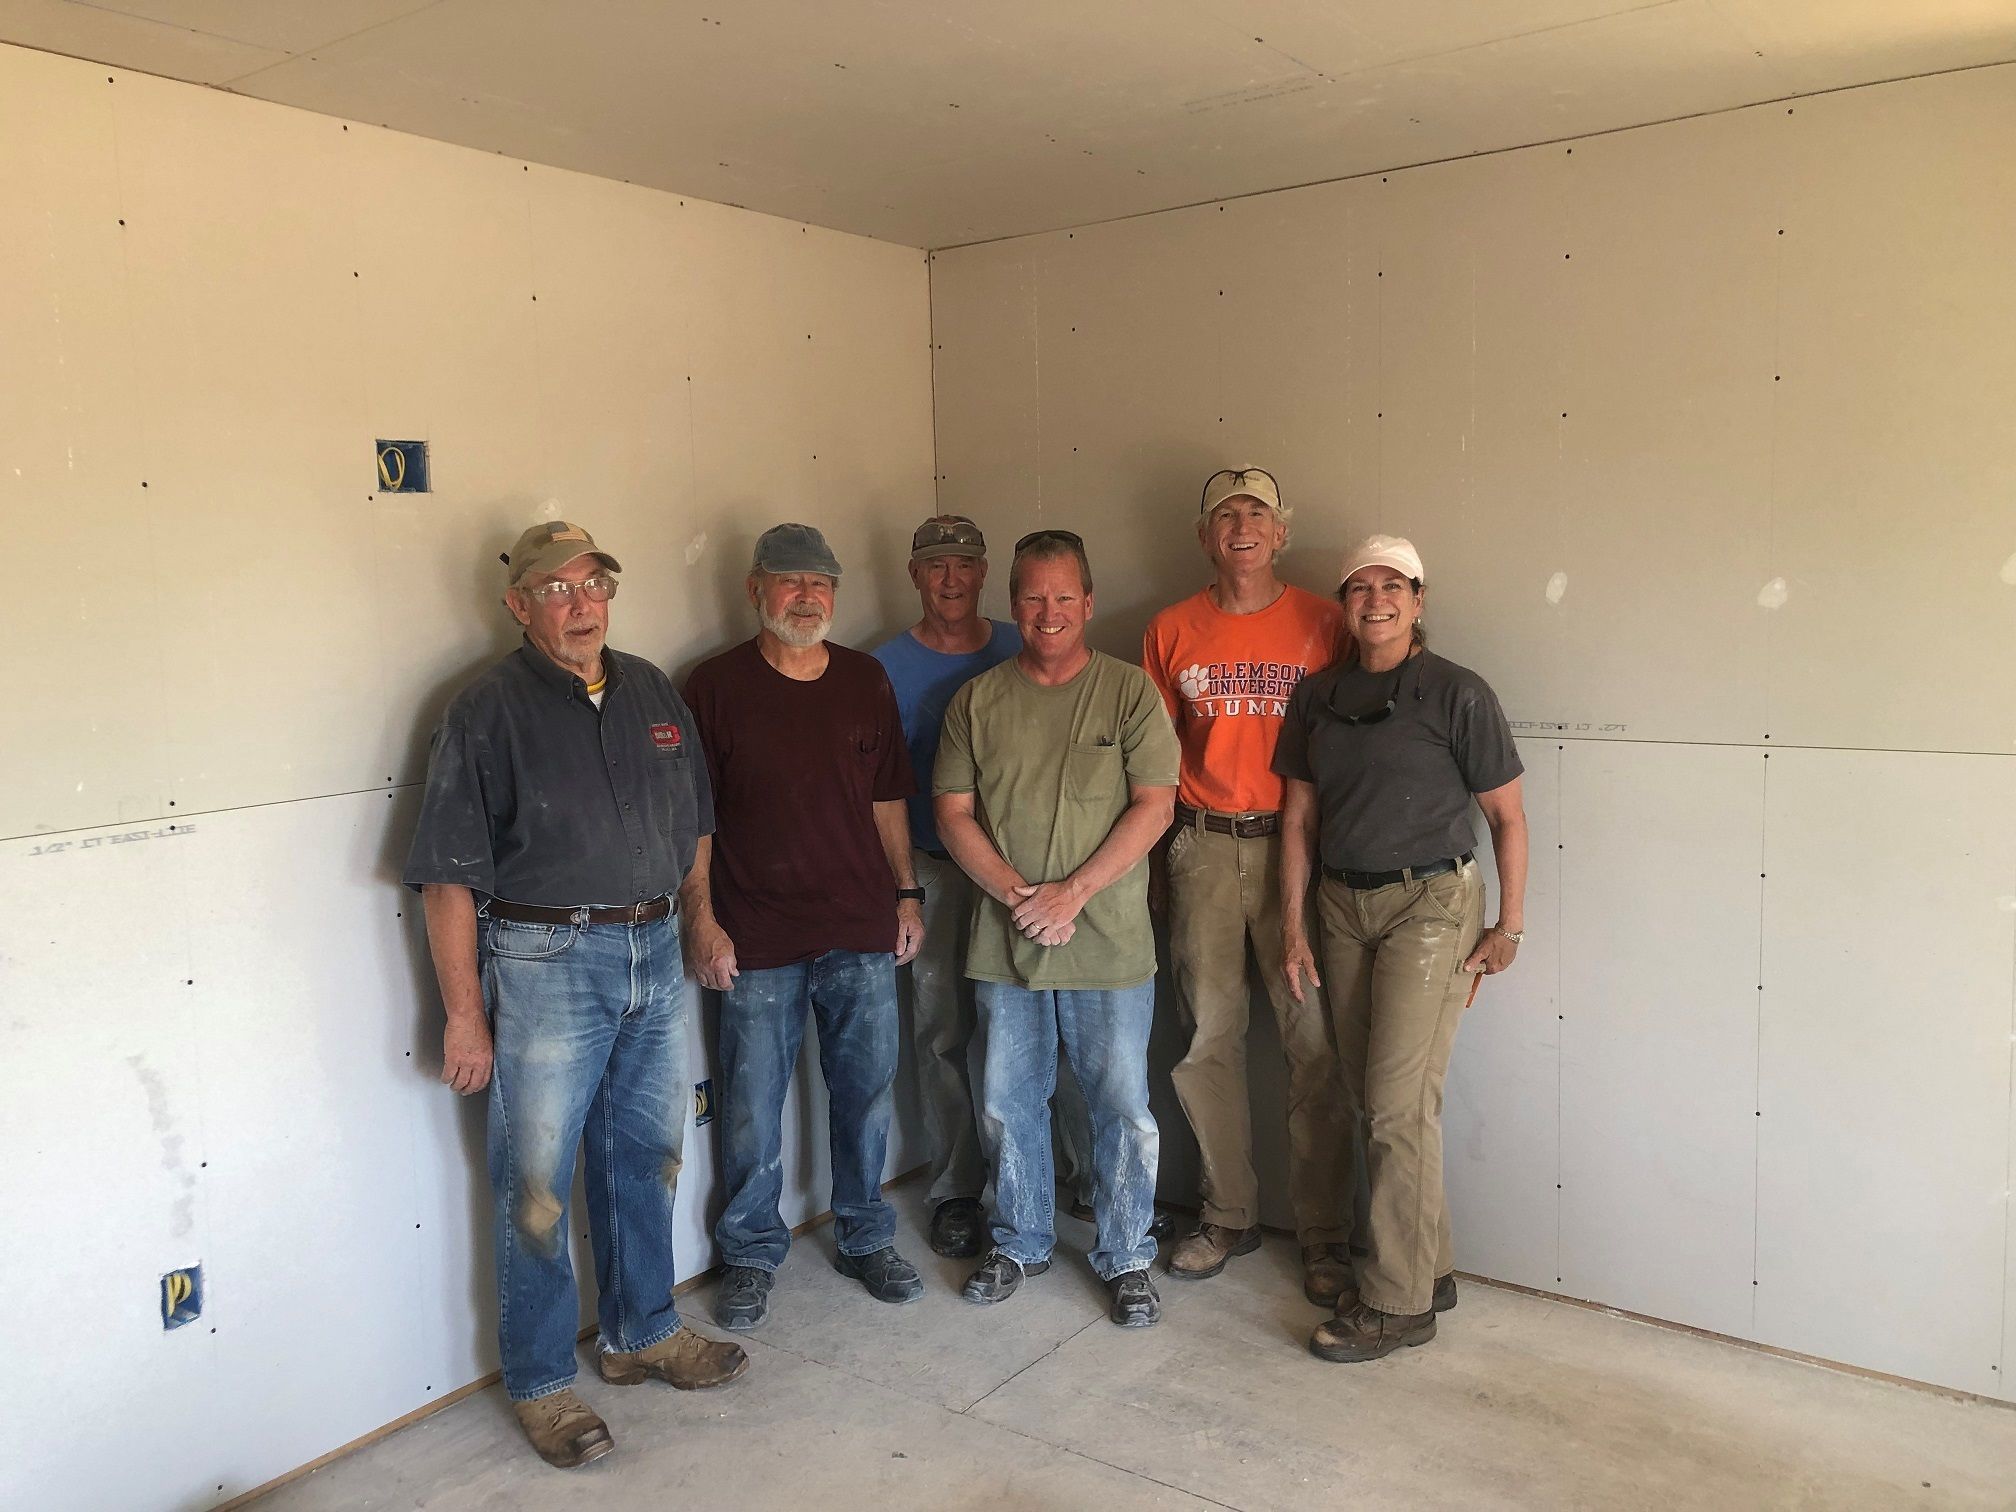 Tuesday/Thursday crew members pose together inside of a Habitat house under construction